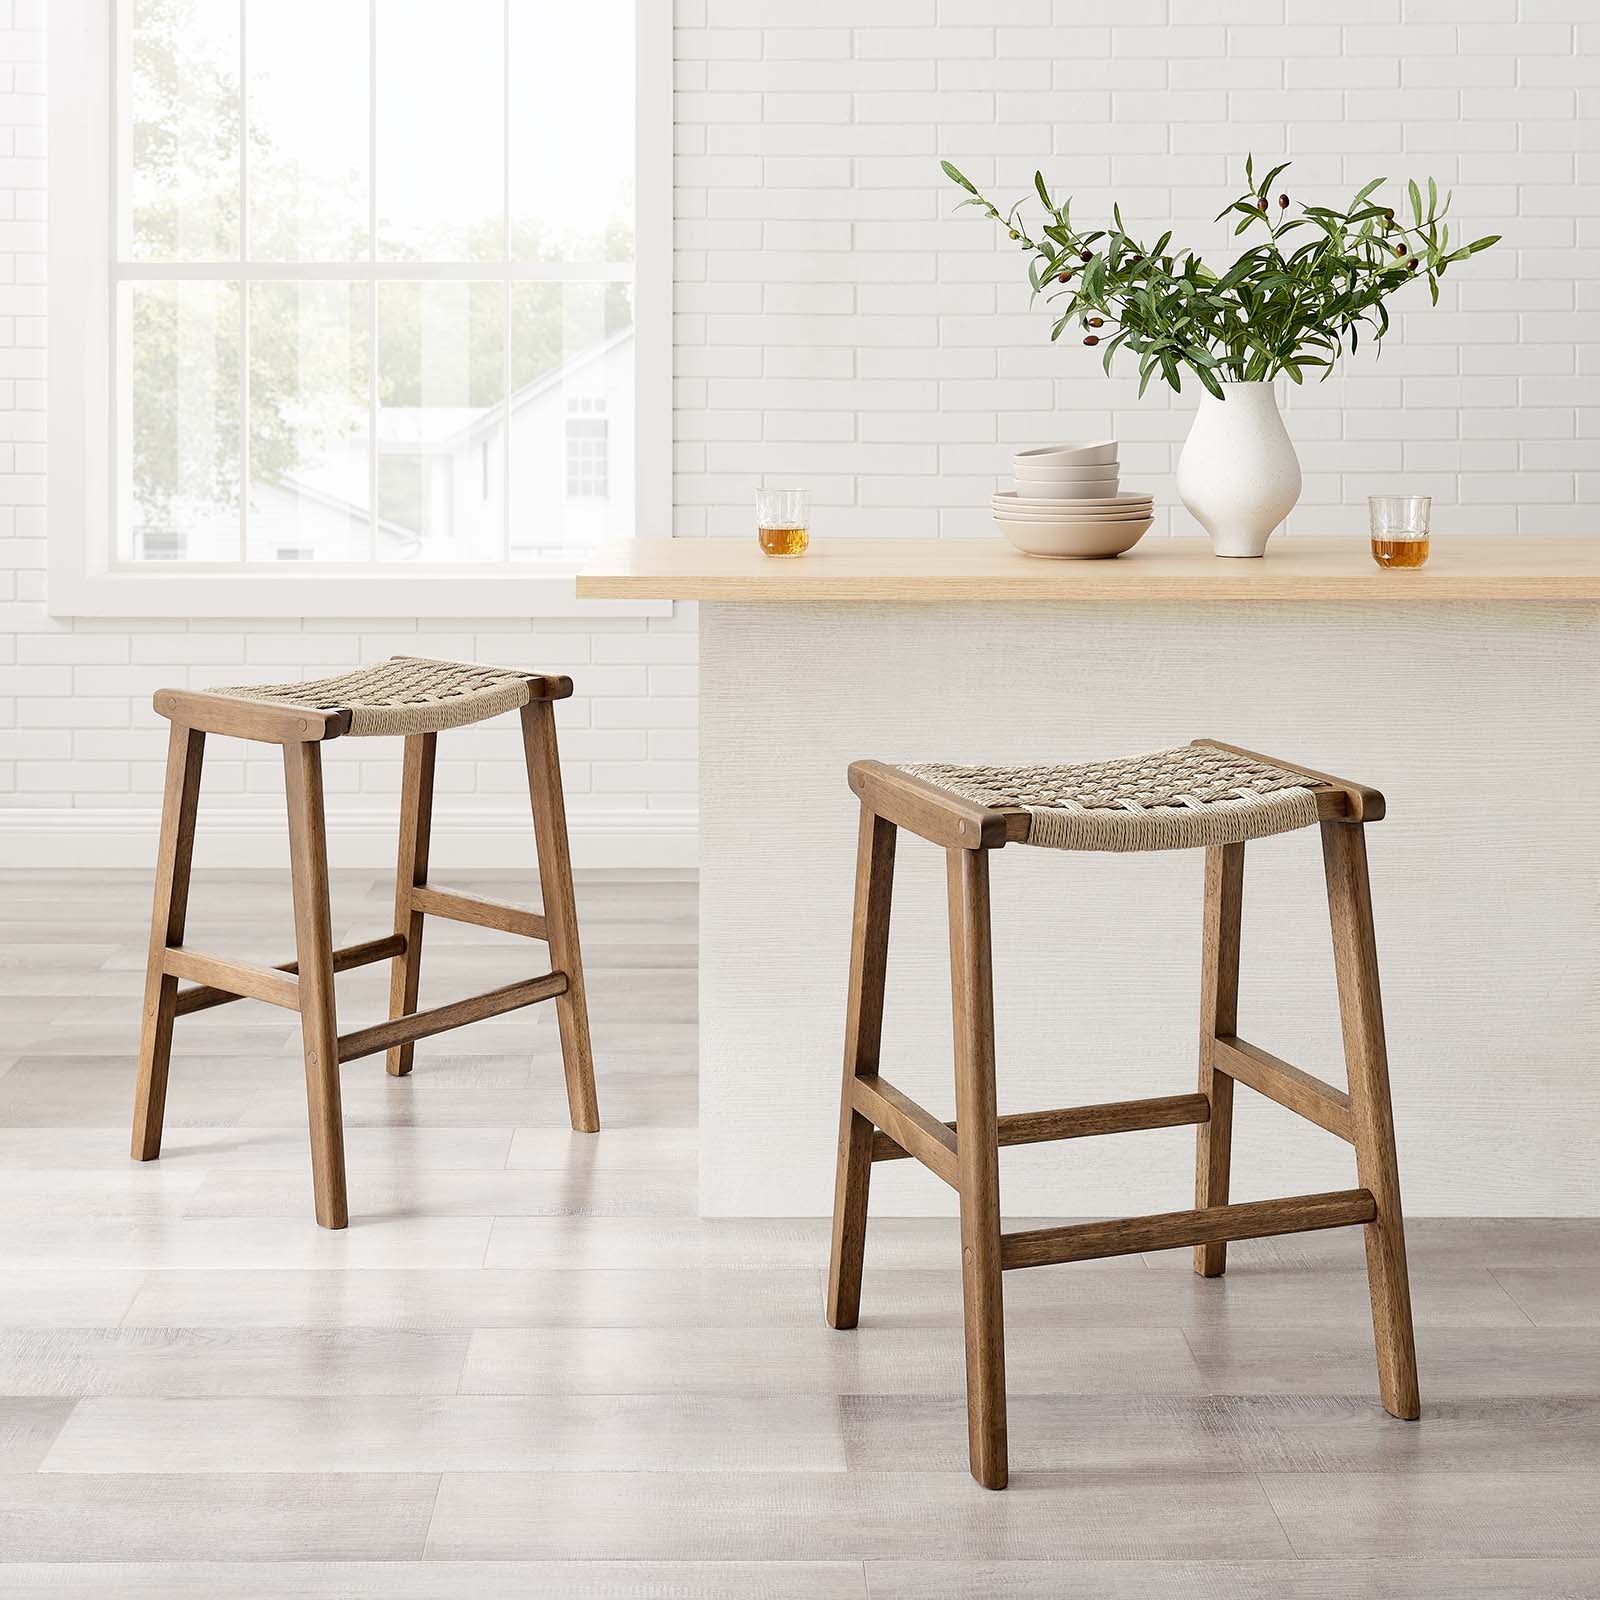 Saoirse Woven Rope Wood Counter Stool - Set of 2 By Modway - EEI-6548 | Counter Stools | Modway - 34